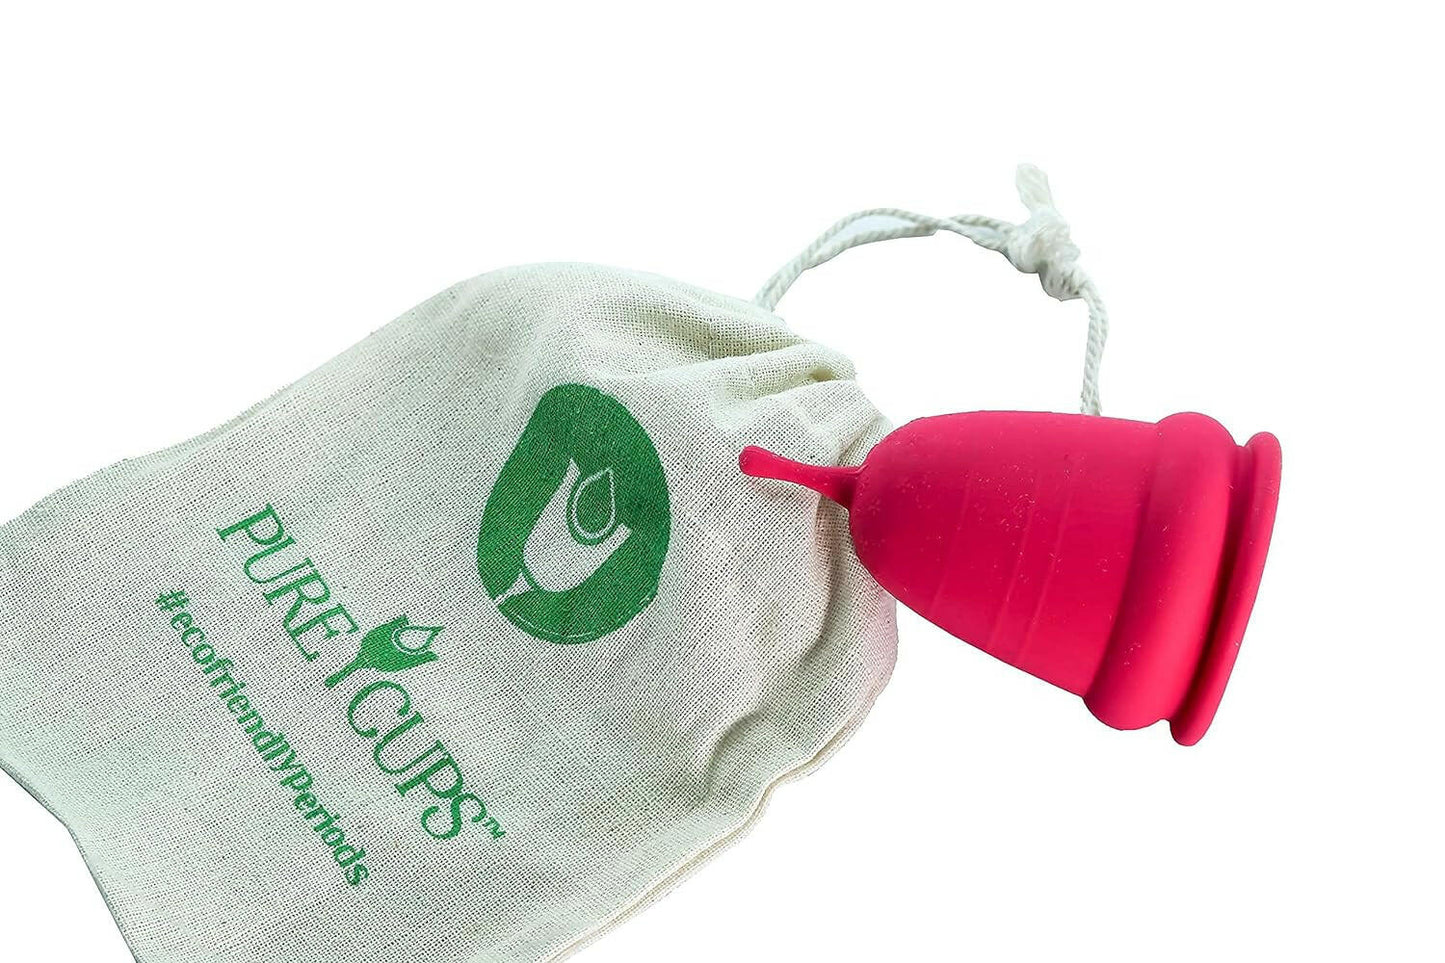 Pure Cups Reusable Menstrual Cup